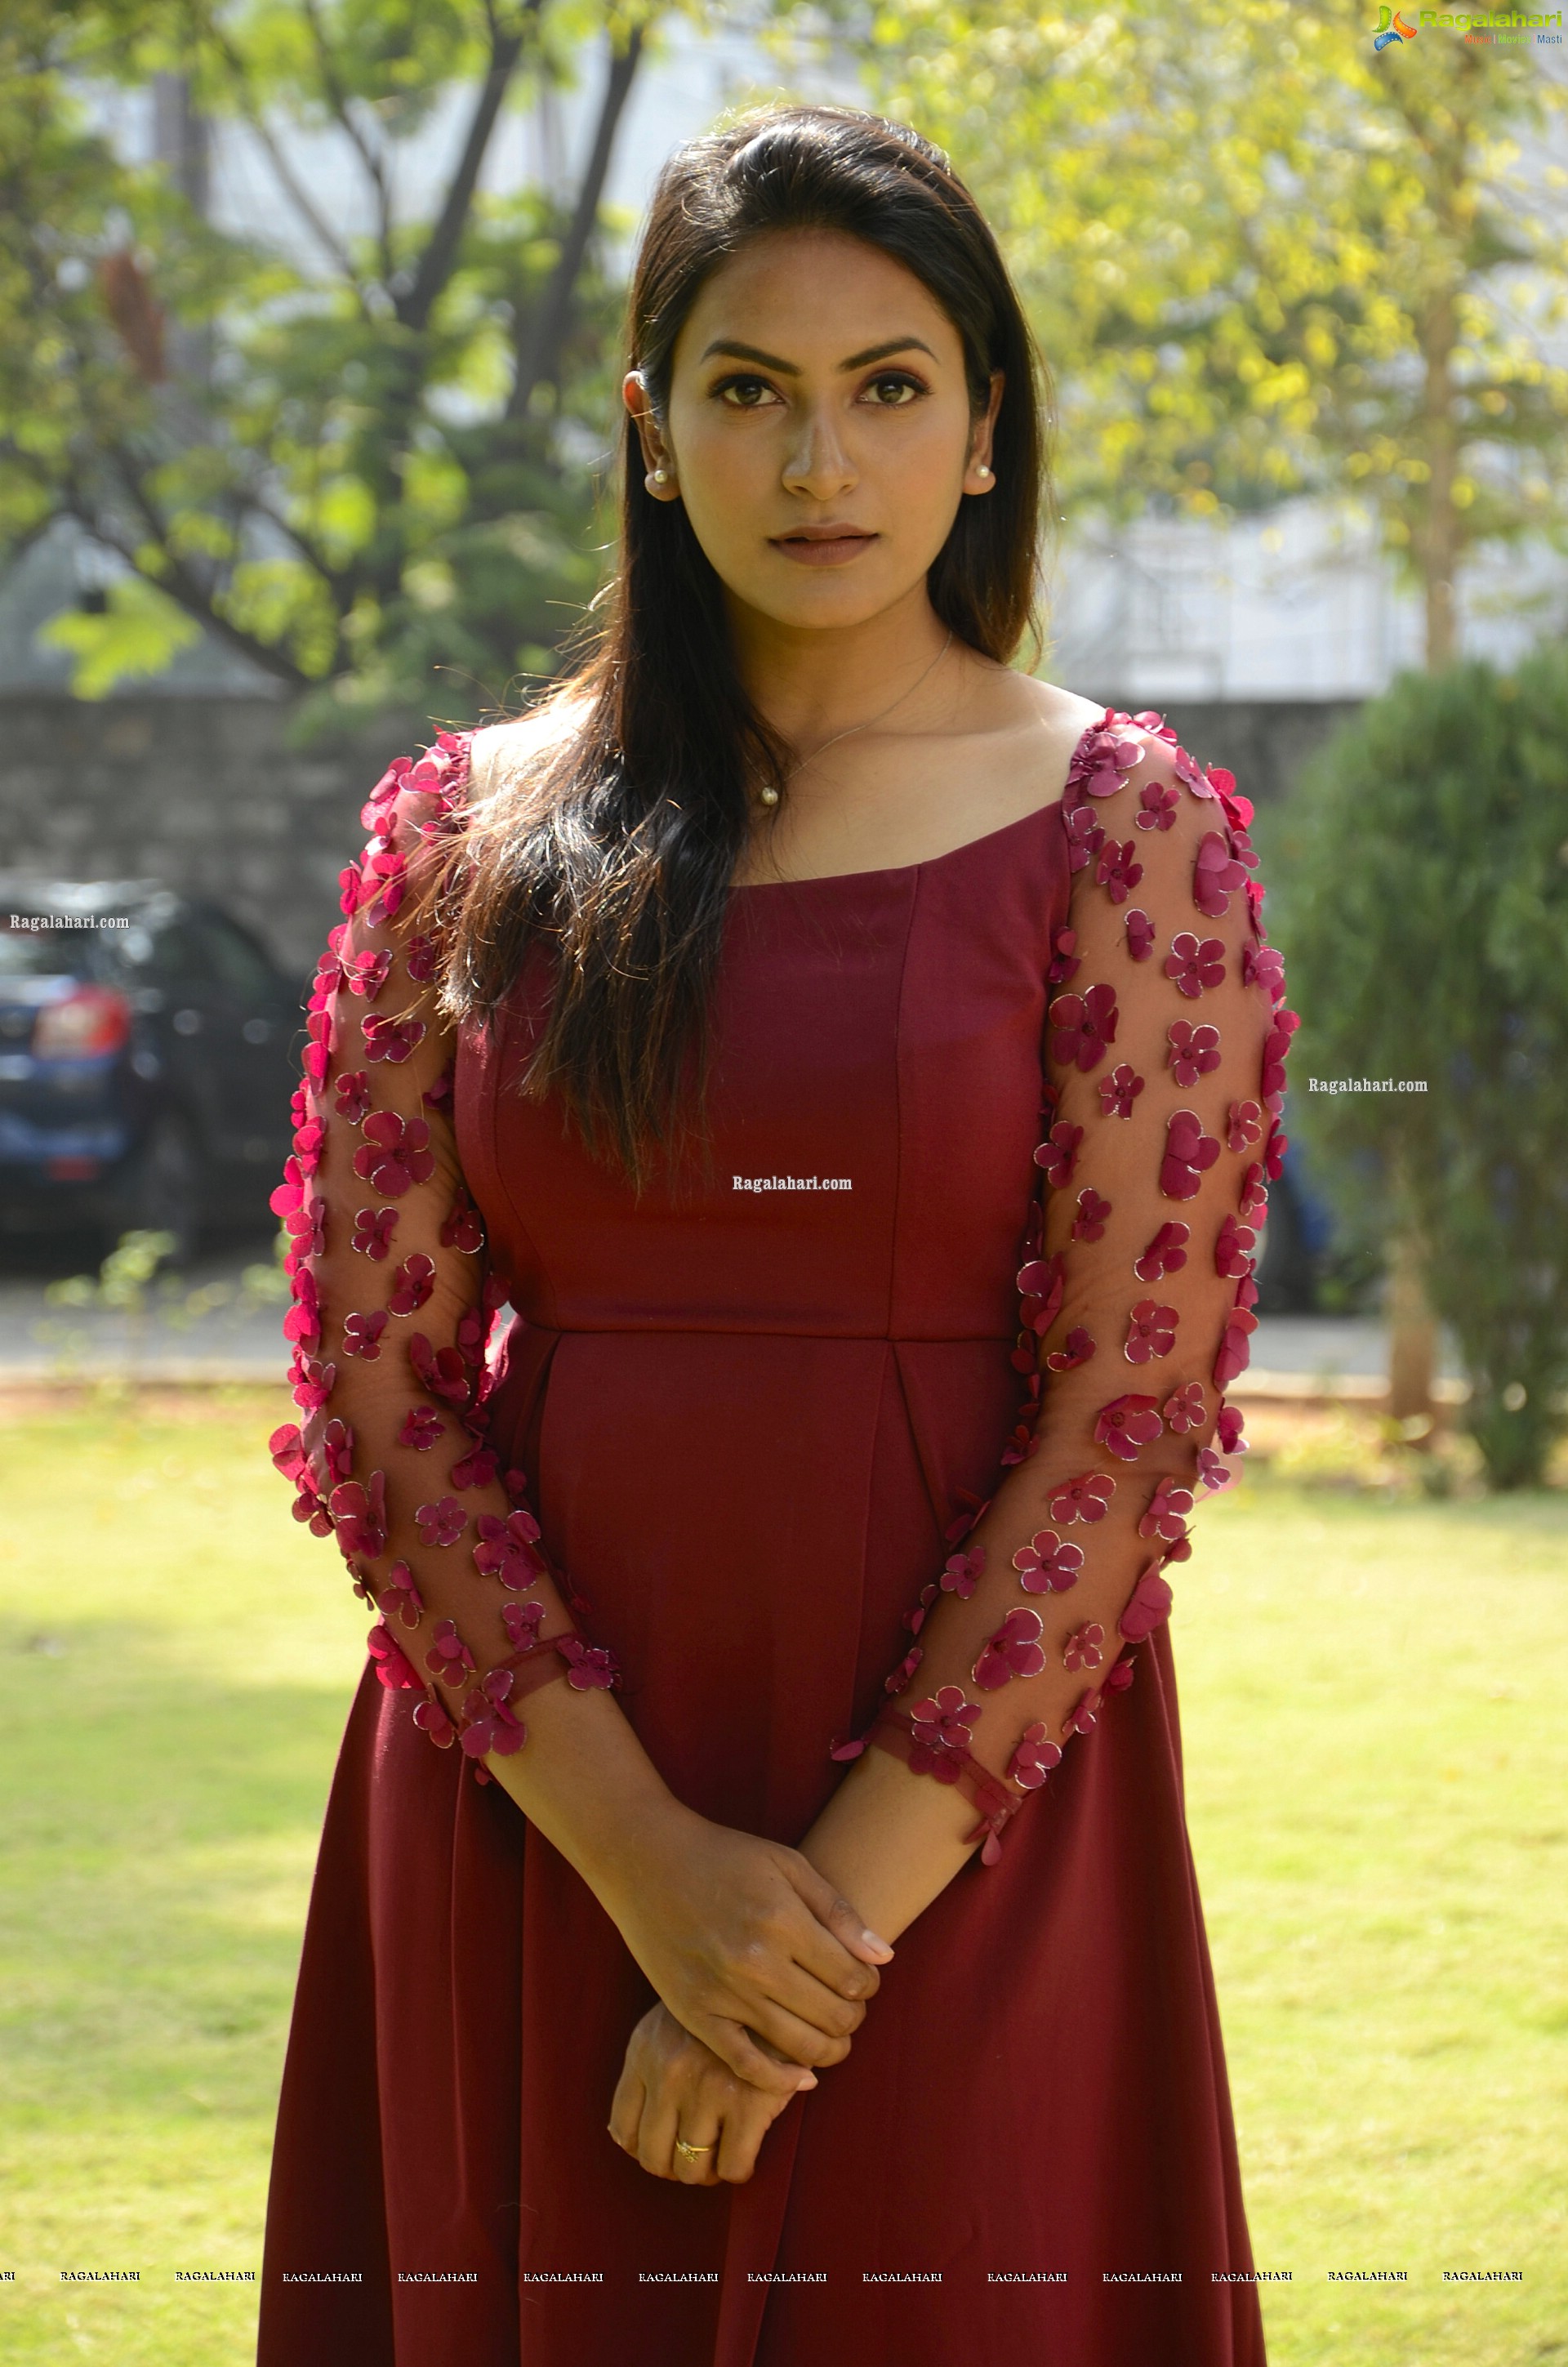 Swetaa Varma at MAD Movie Trailer Launch, HD Photo Gallery (Mark for Delete)